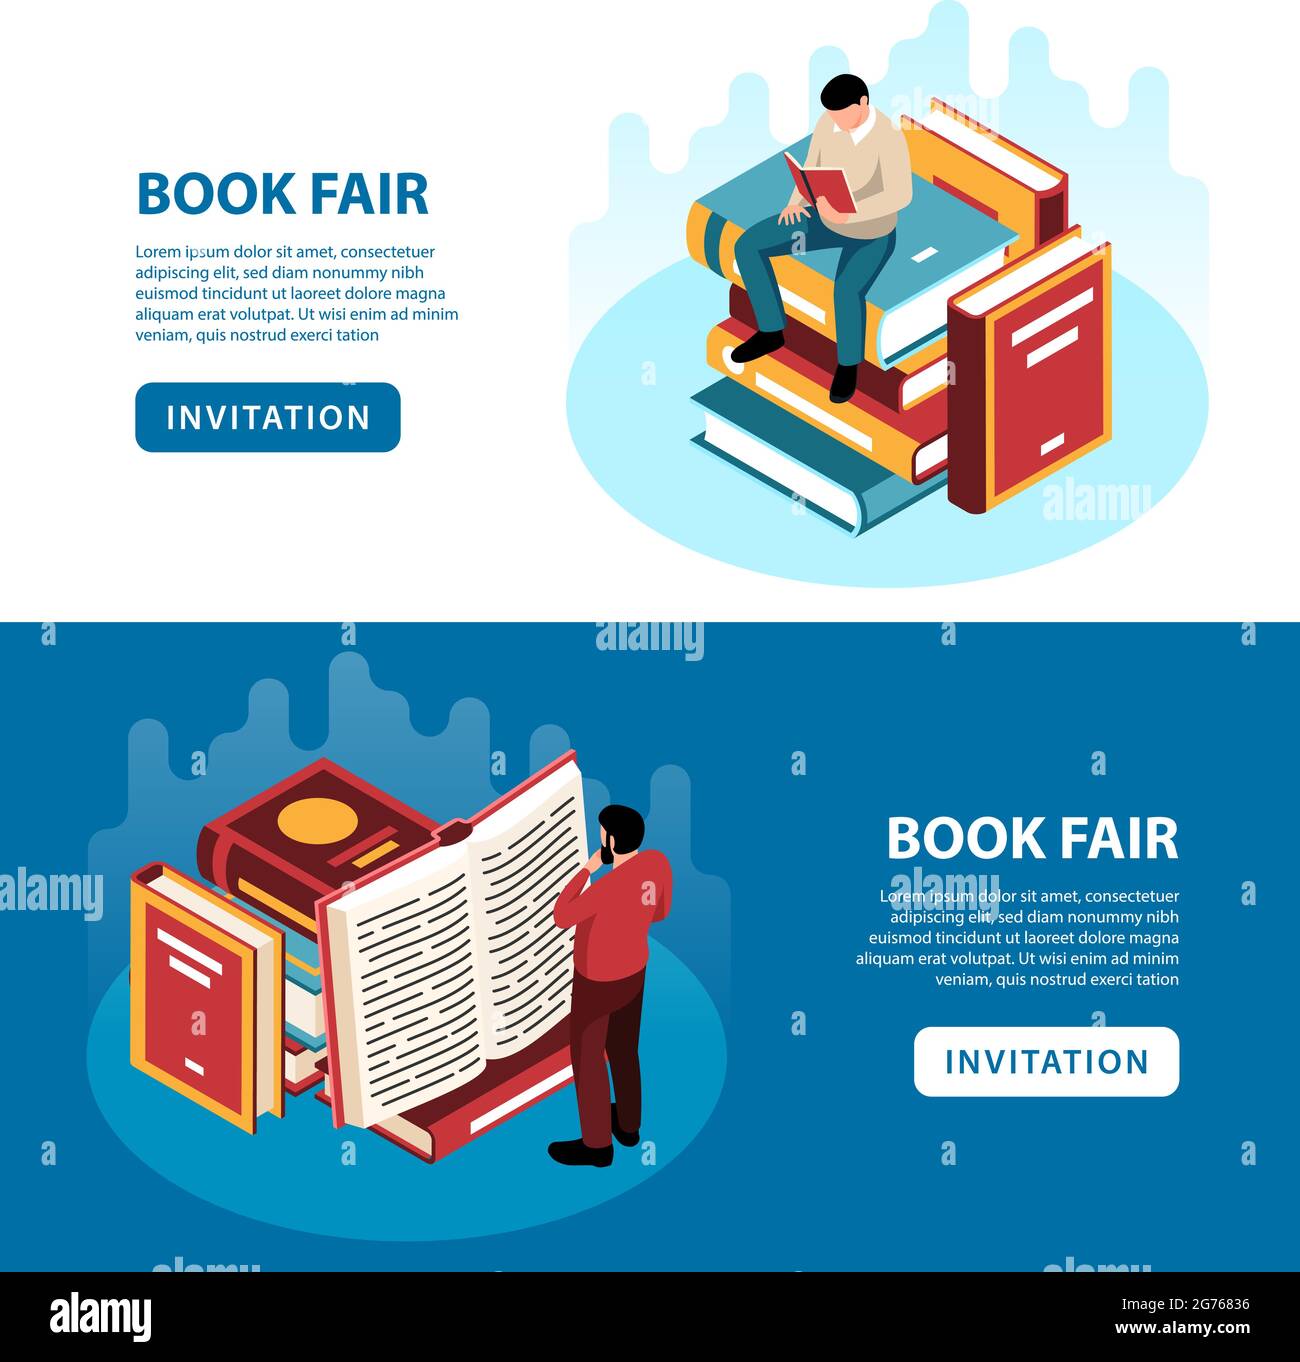 Isometric banners set with people reading books at fair 3d isolated vector illustration Stock Vector